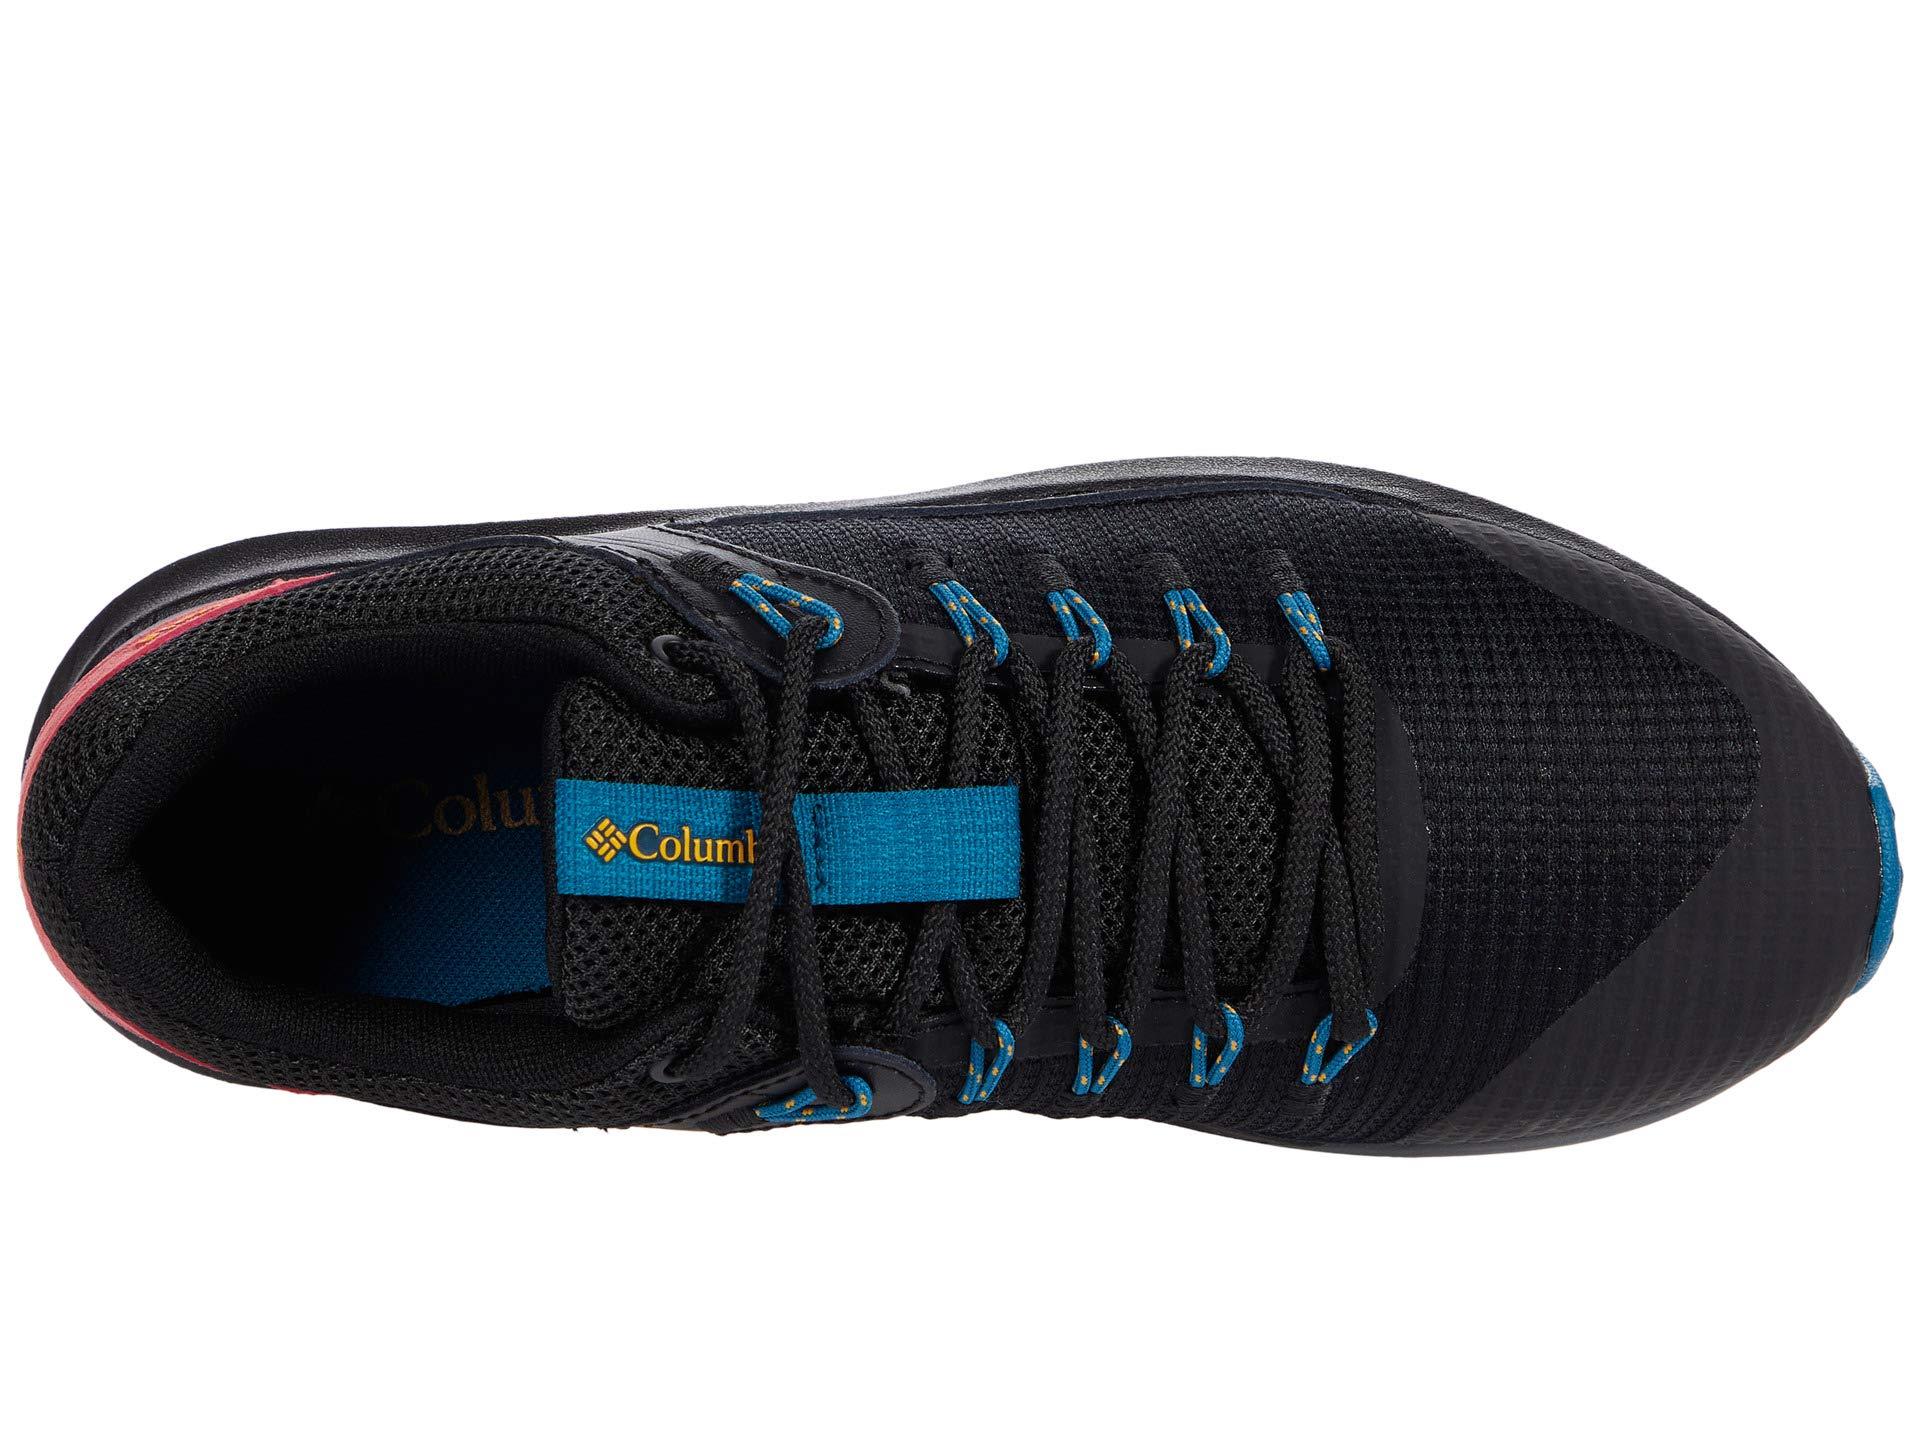 Columbia Leather Trailstorm Waterproof in Black/Bright Marigold 